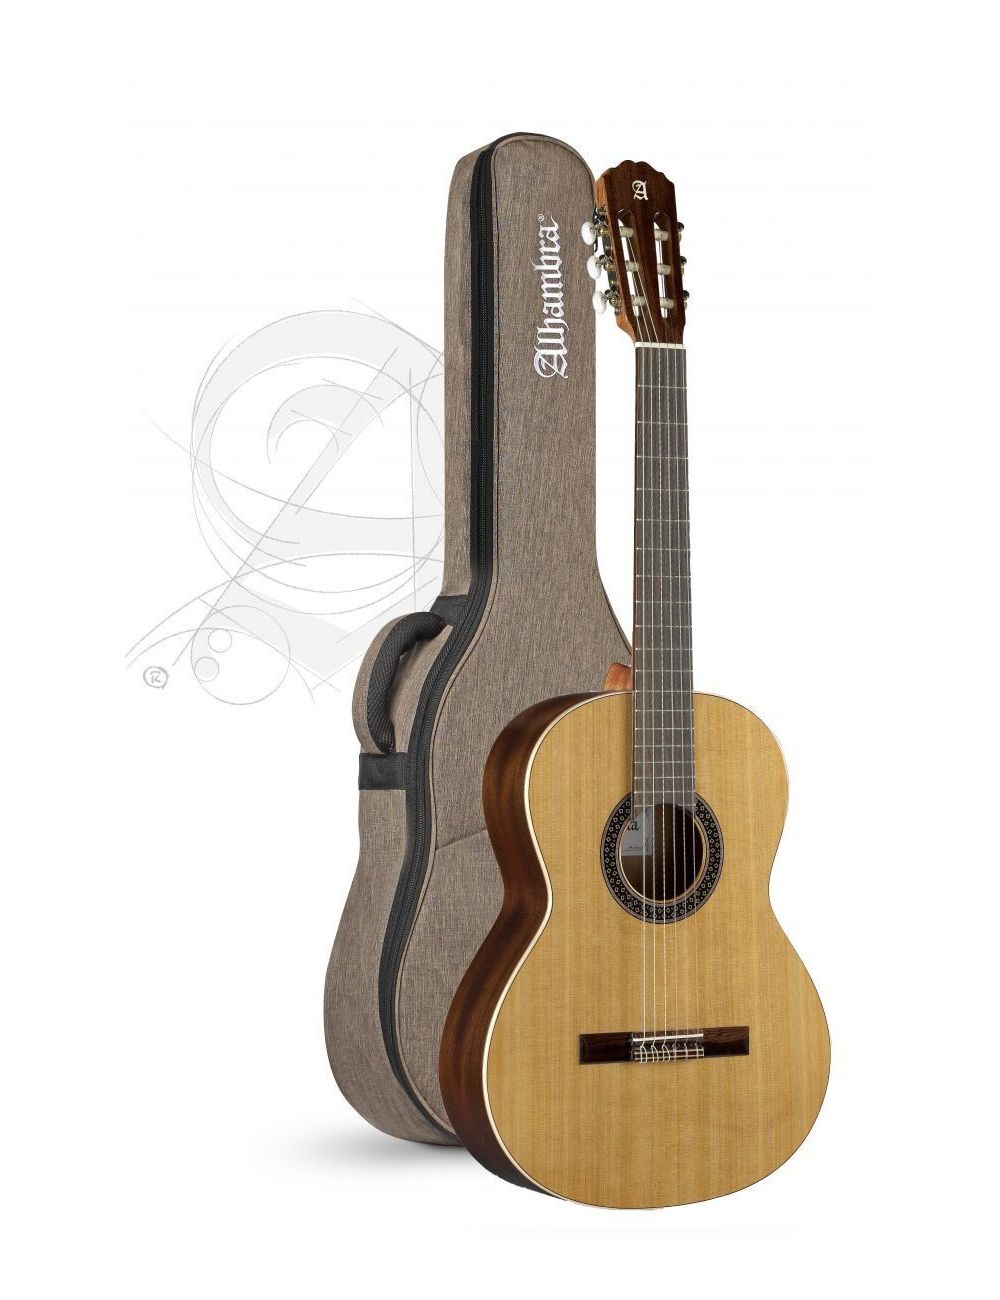 Alhambra 1C HT 1/2 Classical Guitar 1C HT 1/2 Special sizes